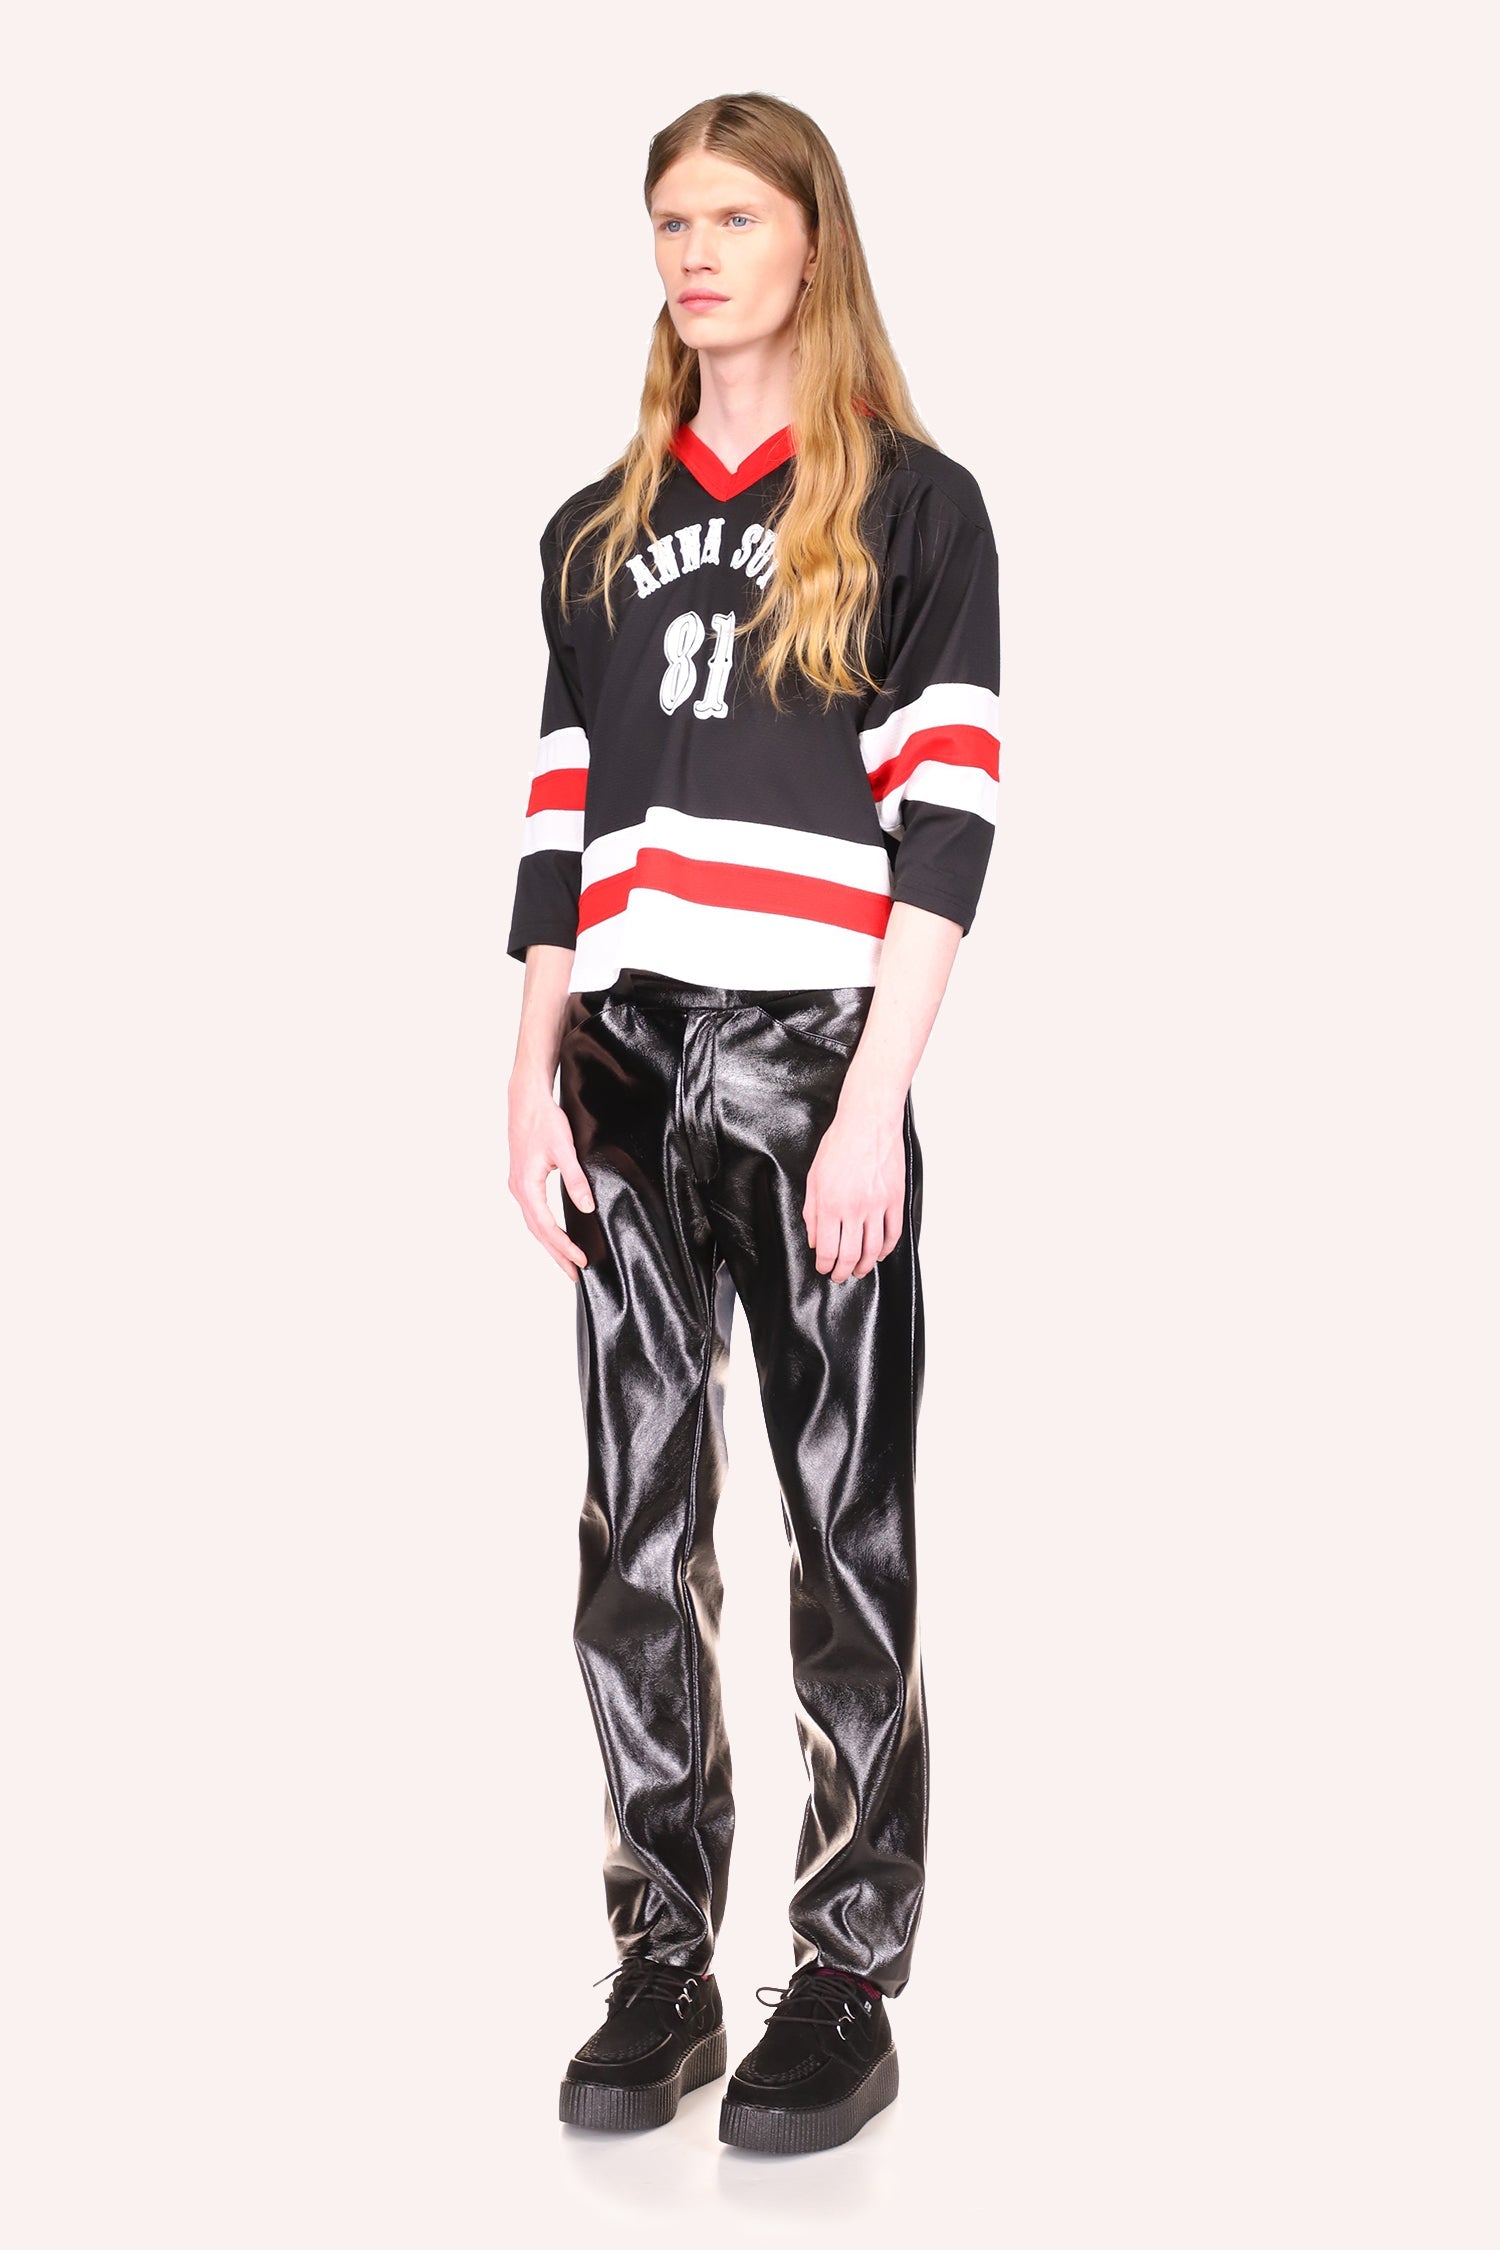 Jersey mid arms sleeves, red v-collar, black on top, Anna Sui and 81 in white, stripes of red on white